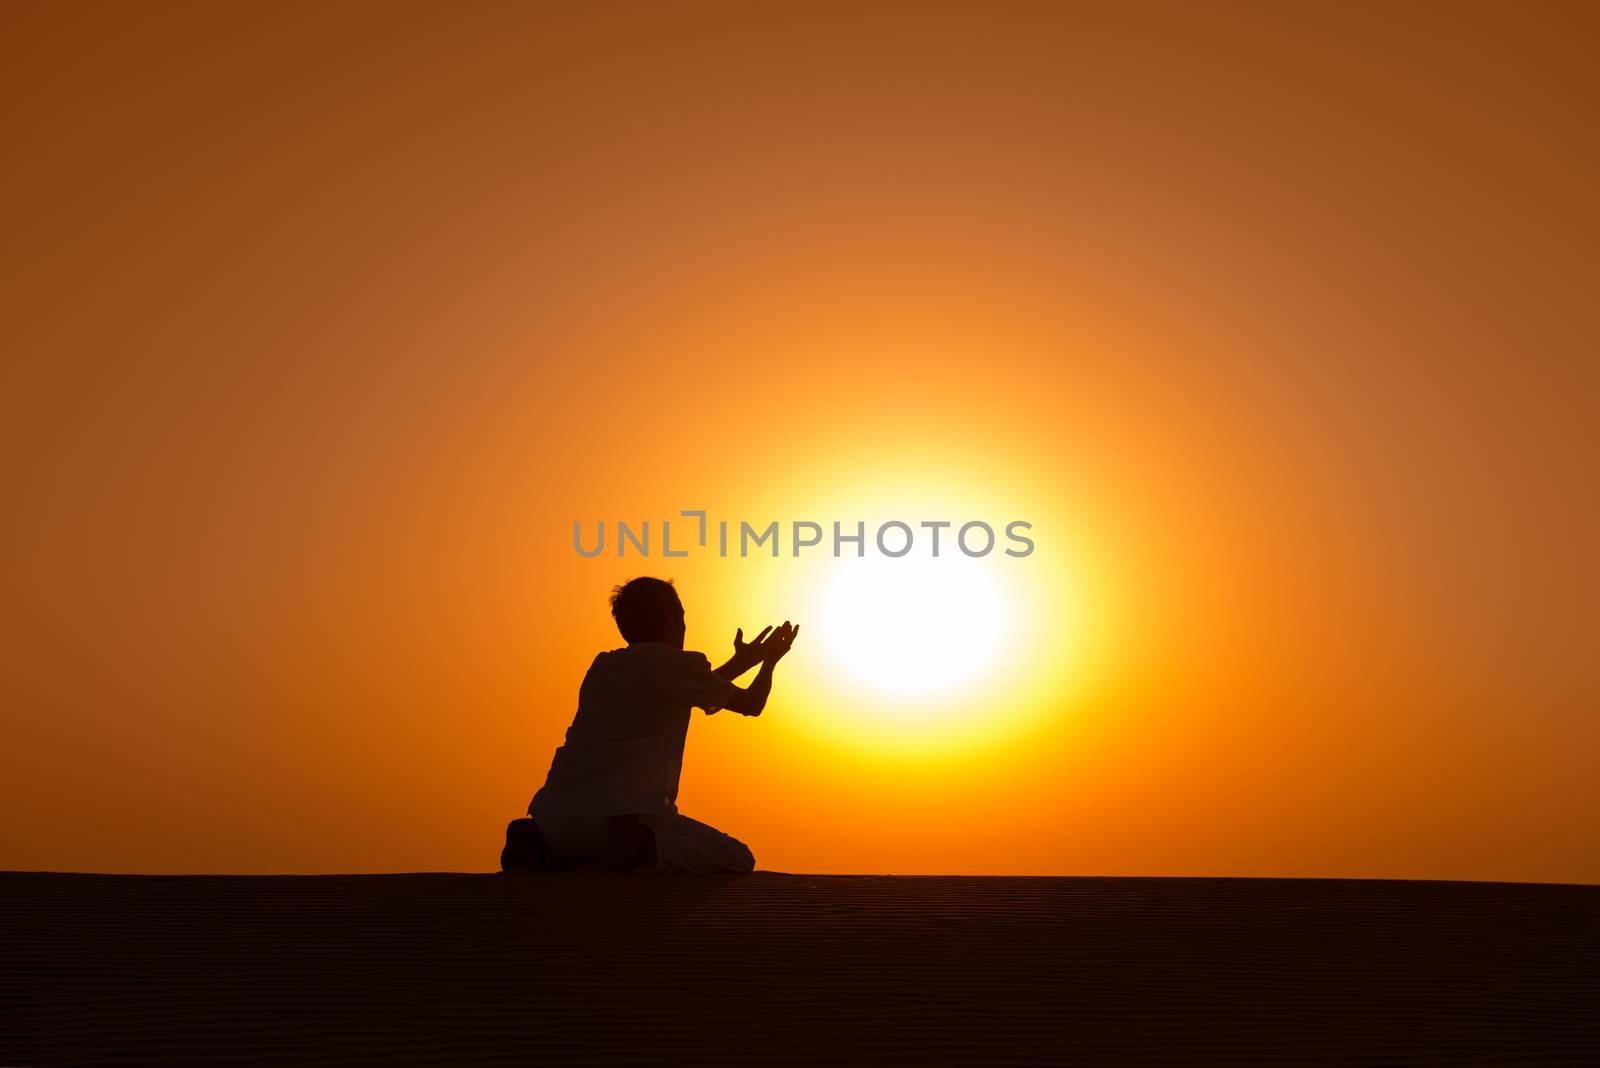 Man silhouette kneel and pray for help with gold sunset sun on background